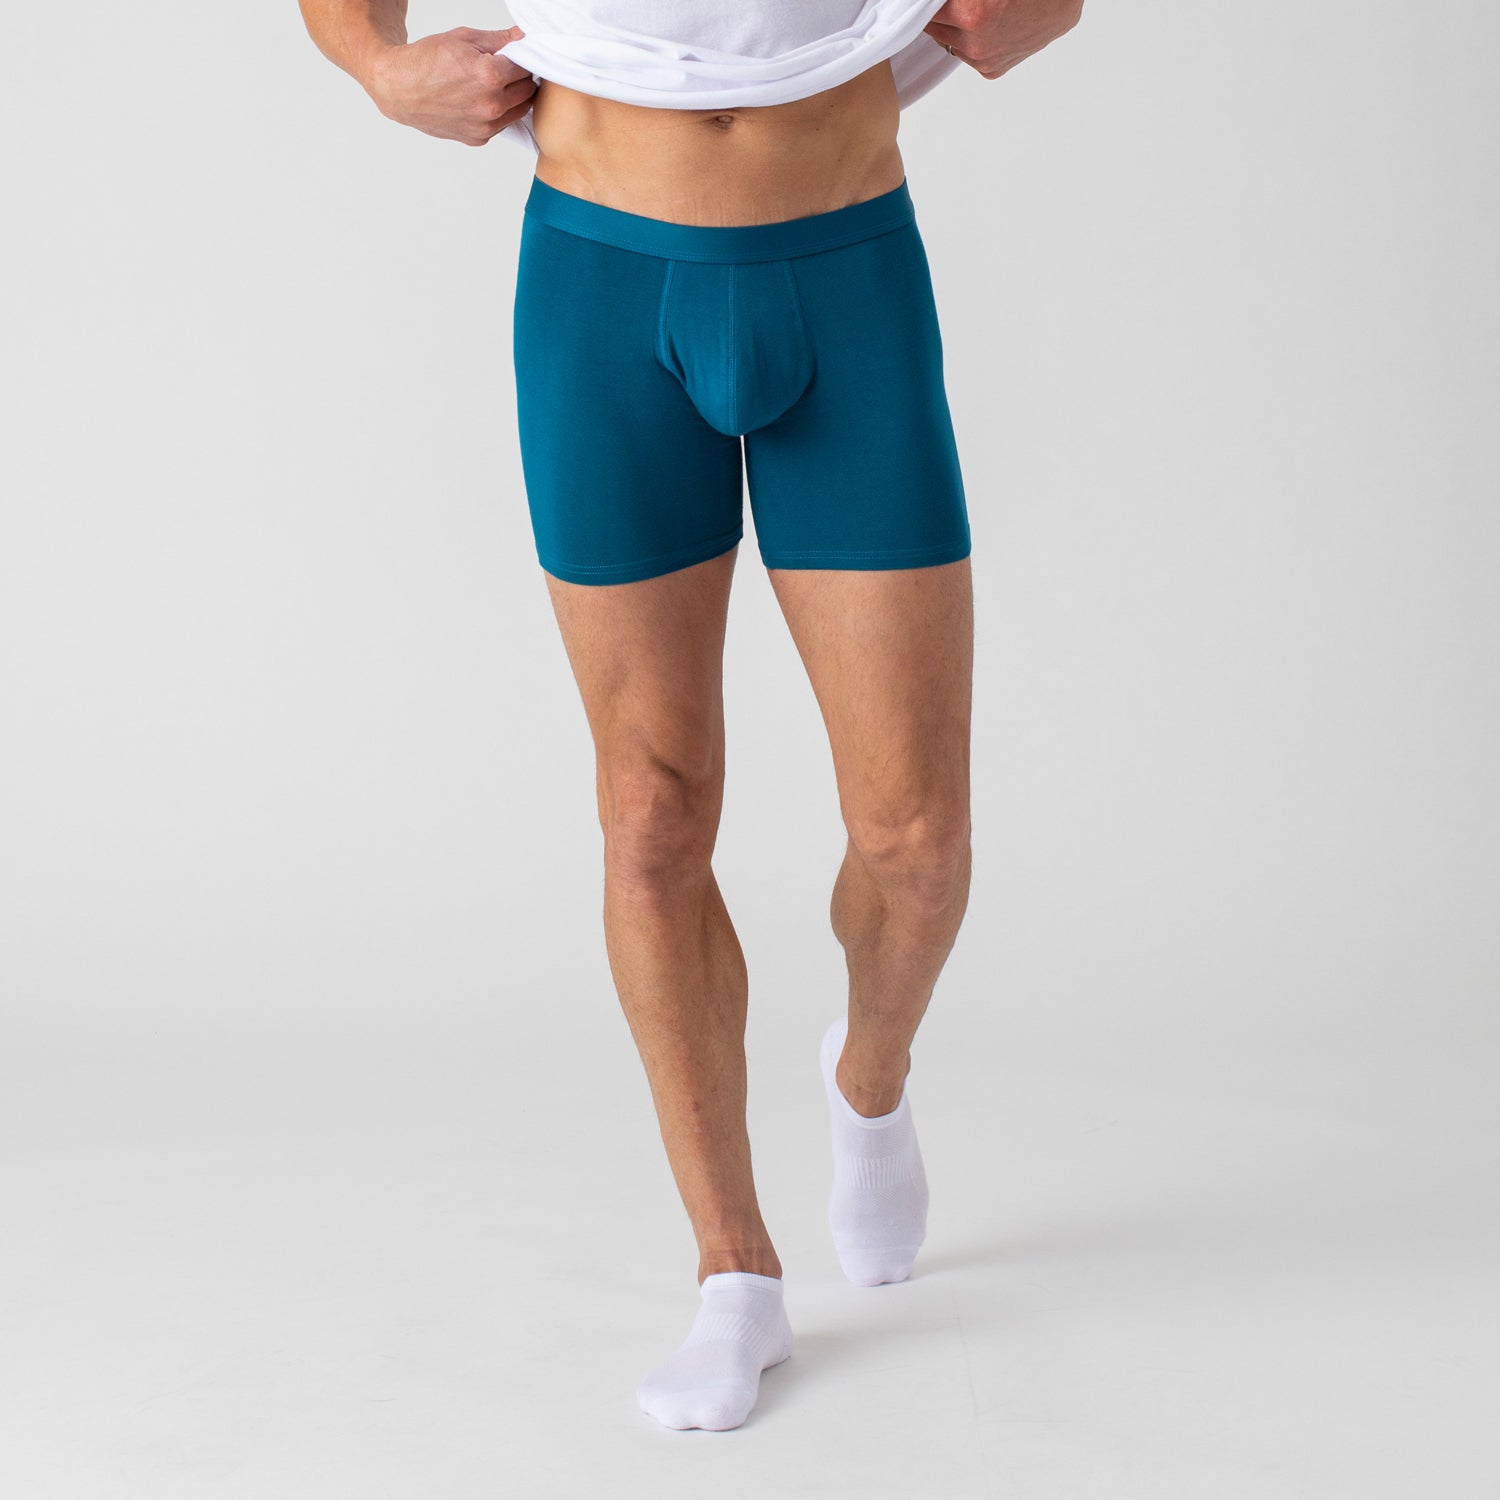 Teal Boxer Briefs 3-Pack – True Classic